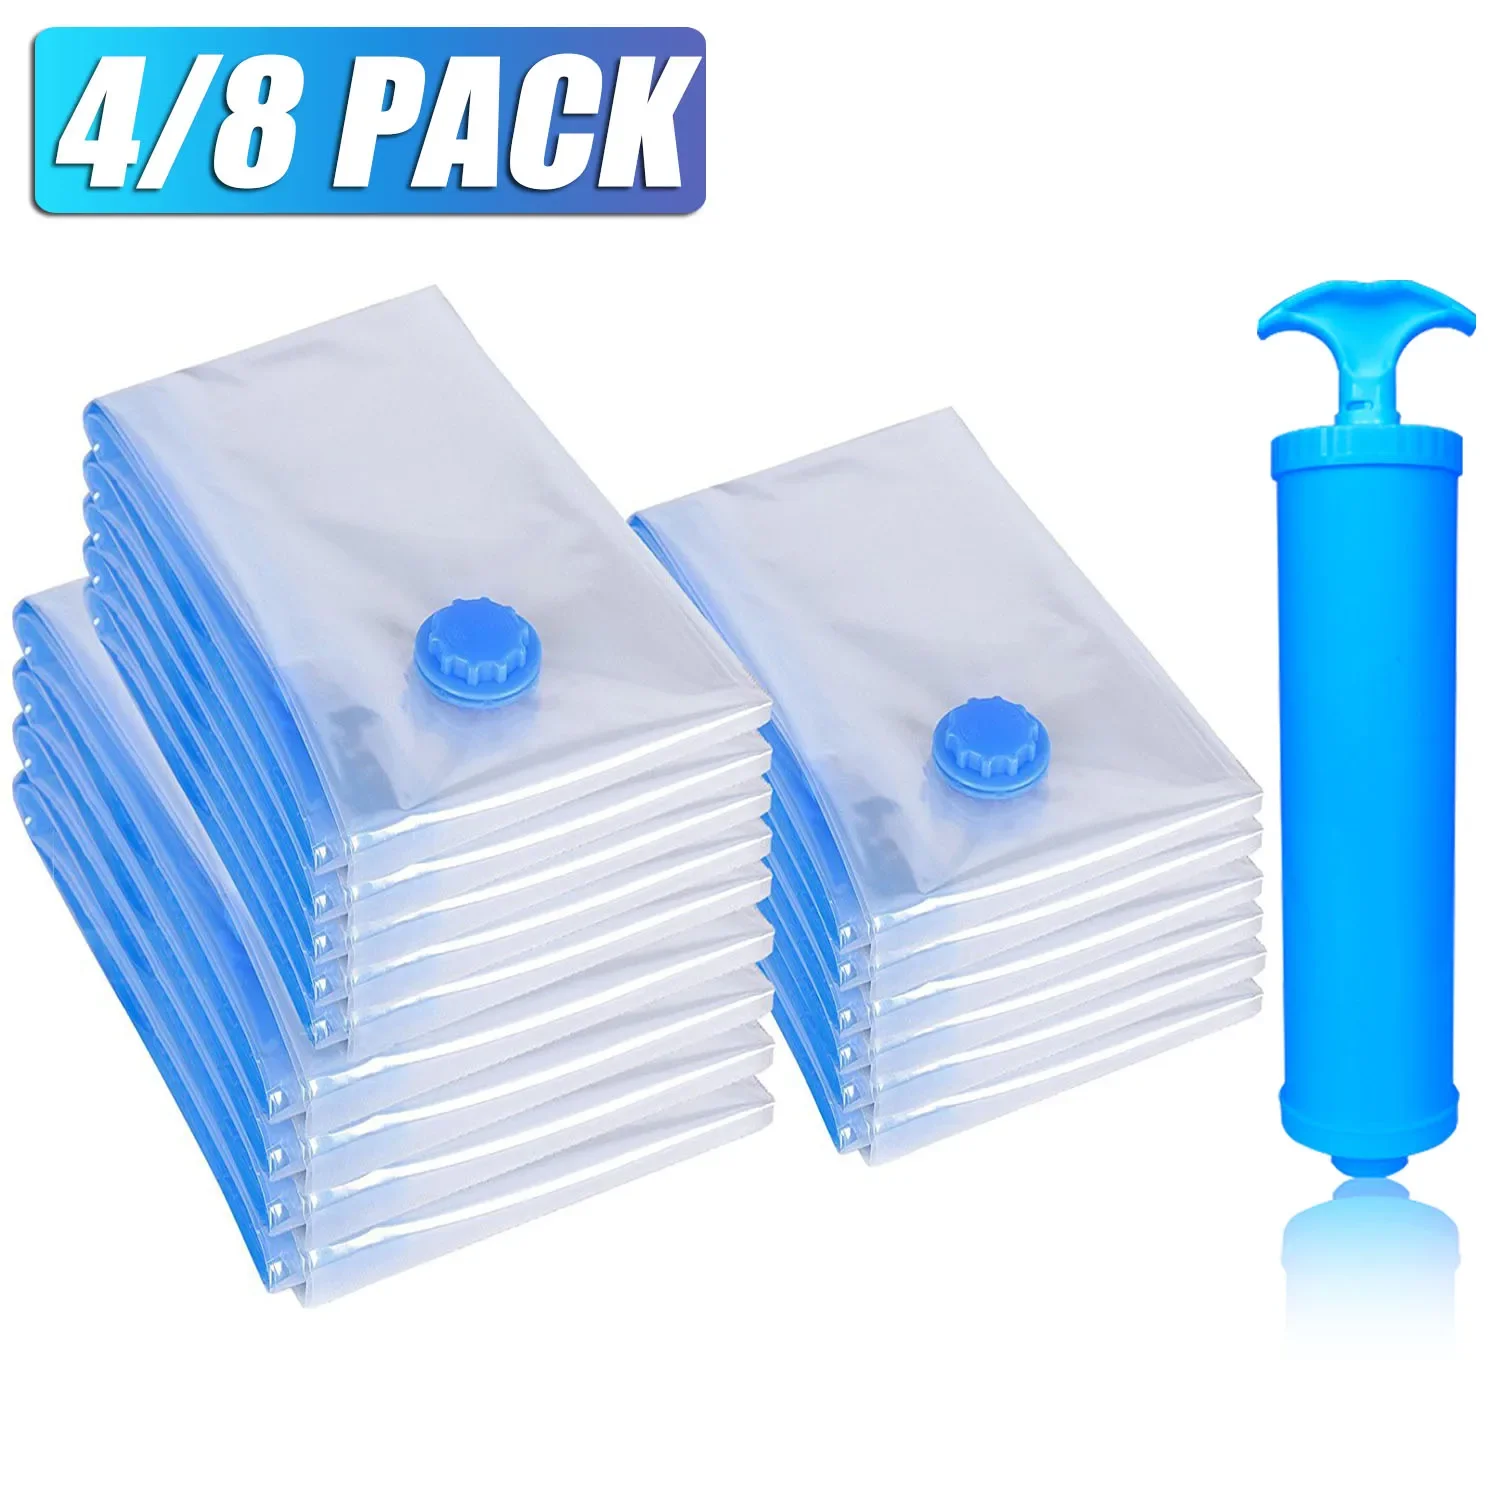 https://ae01.alicdn.com/kf/Sc32c1a0ad0e94b529dbcf9652ec621693/Vacuum-Storage-Bags-8-4-PACK-Vacuum-Bag-Package-Space-Saver-for-Bedding-Pillows-Towel-Clothes.jpg